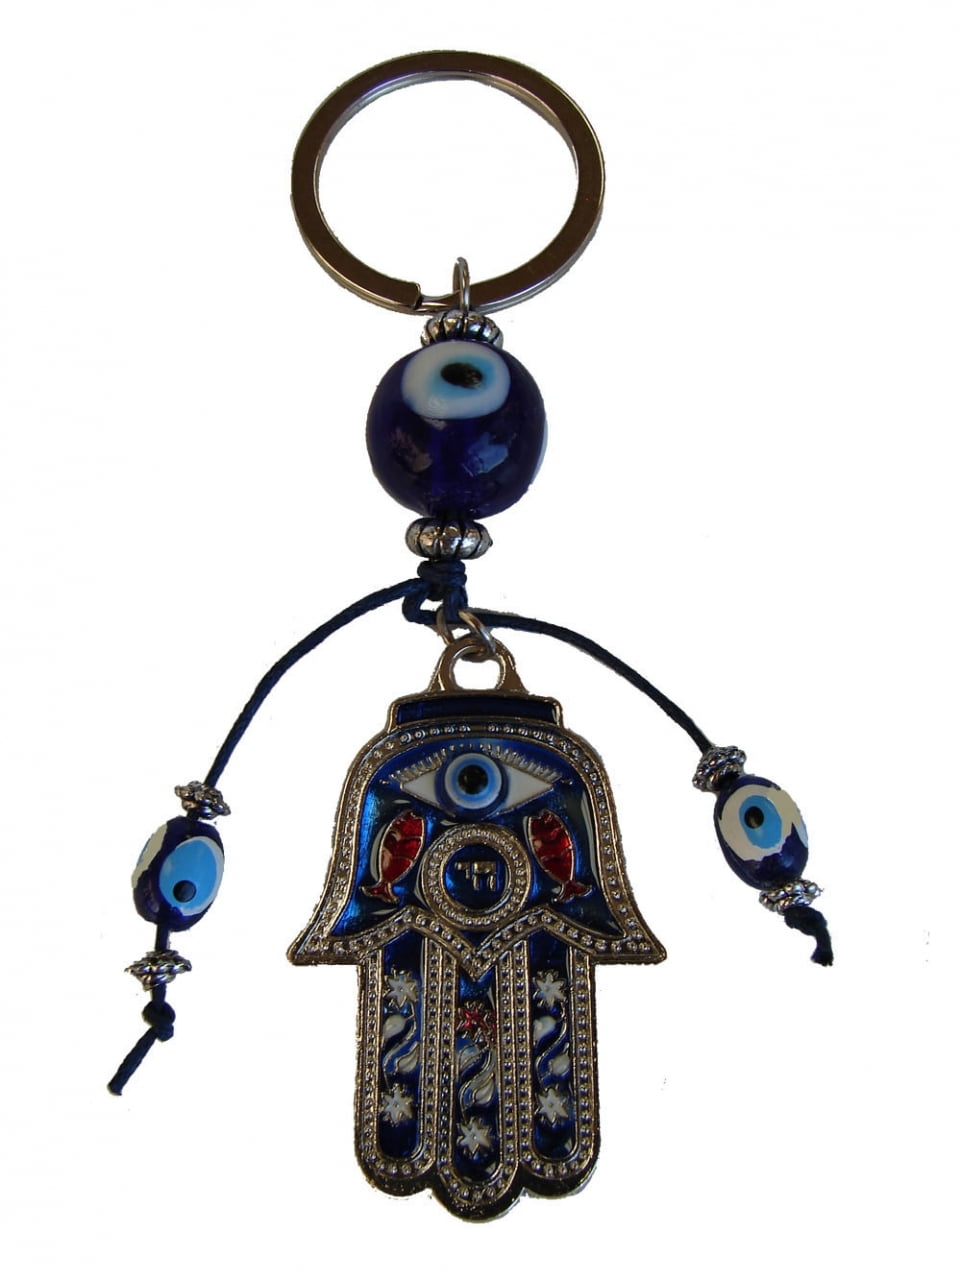 Details about  / Blue Evil Eye Hamsa Hand Keychain Blessing Protection Buena Suerte Good Luck